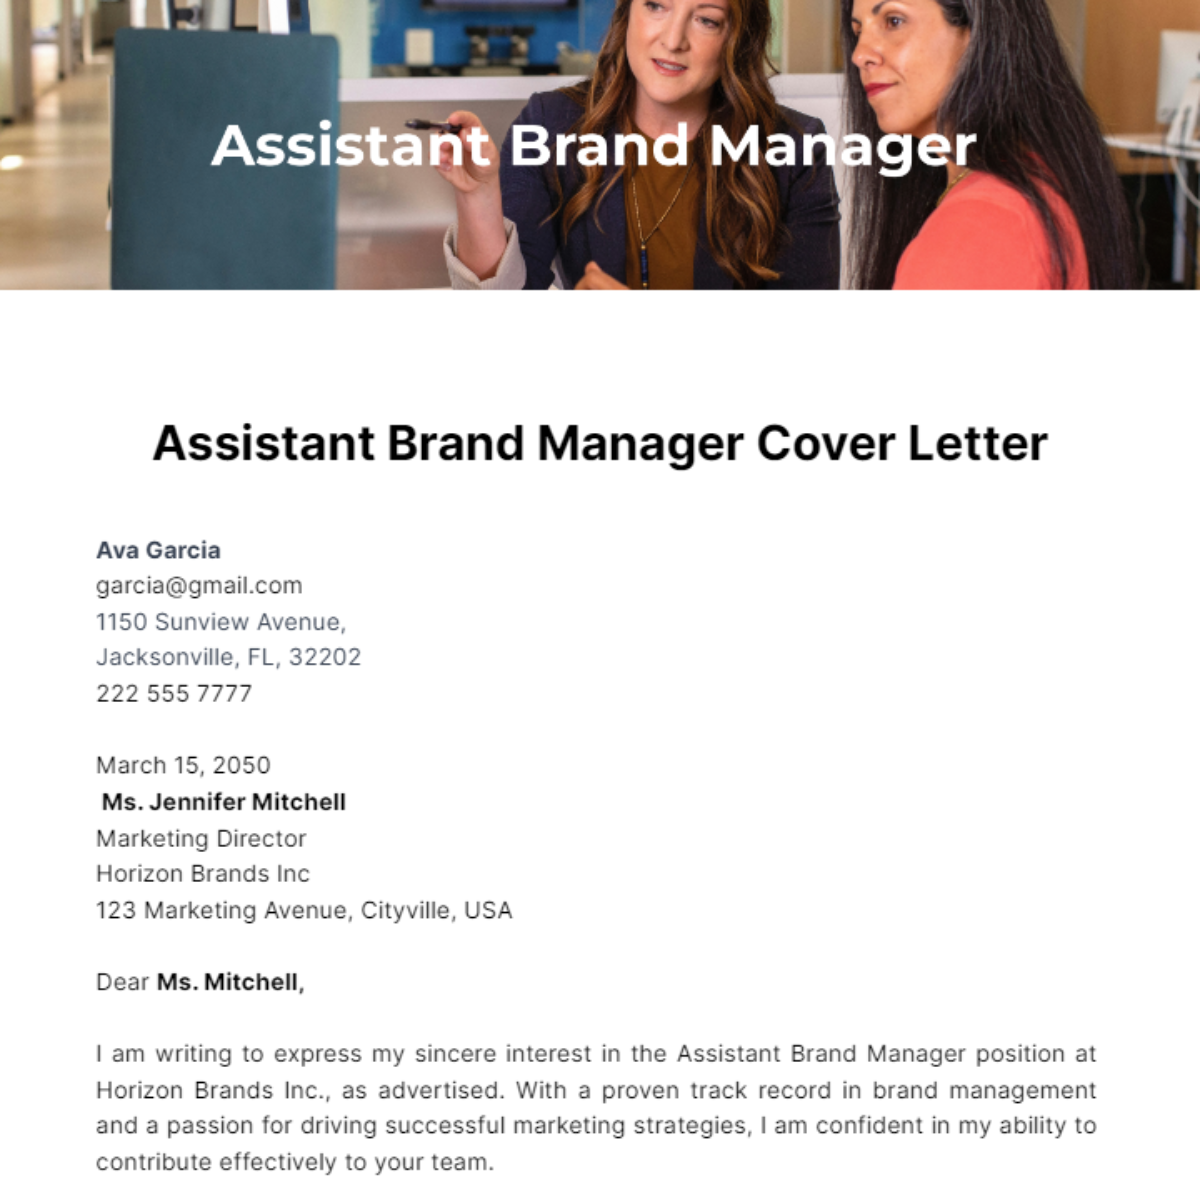 Assistant Brand Manager Cover Letter Template